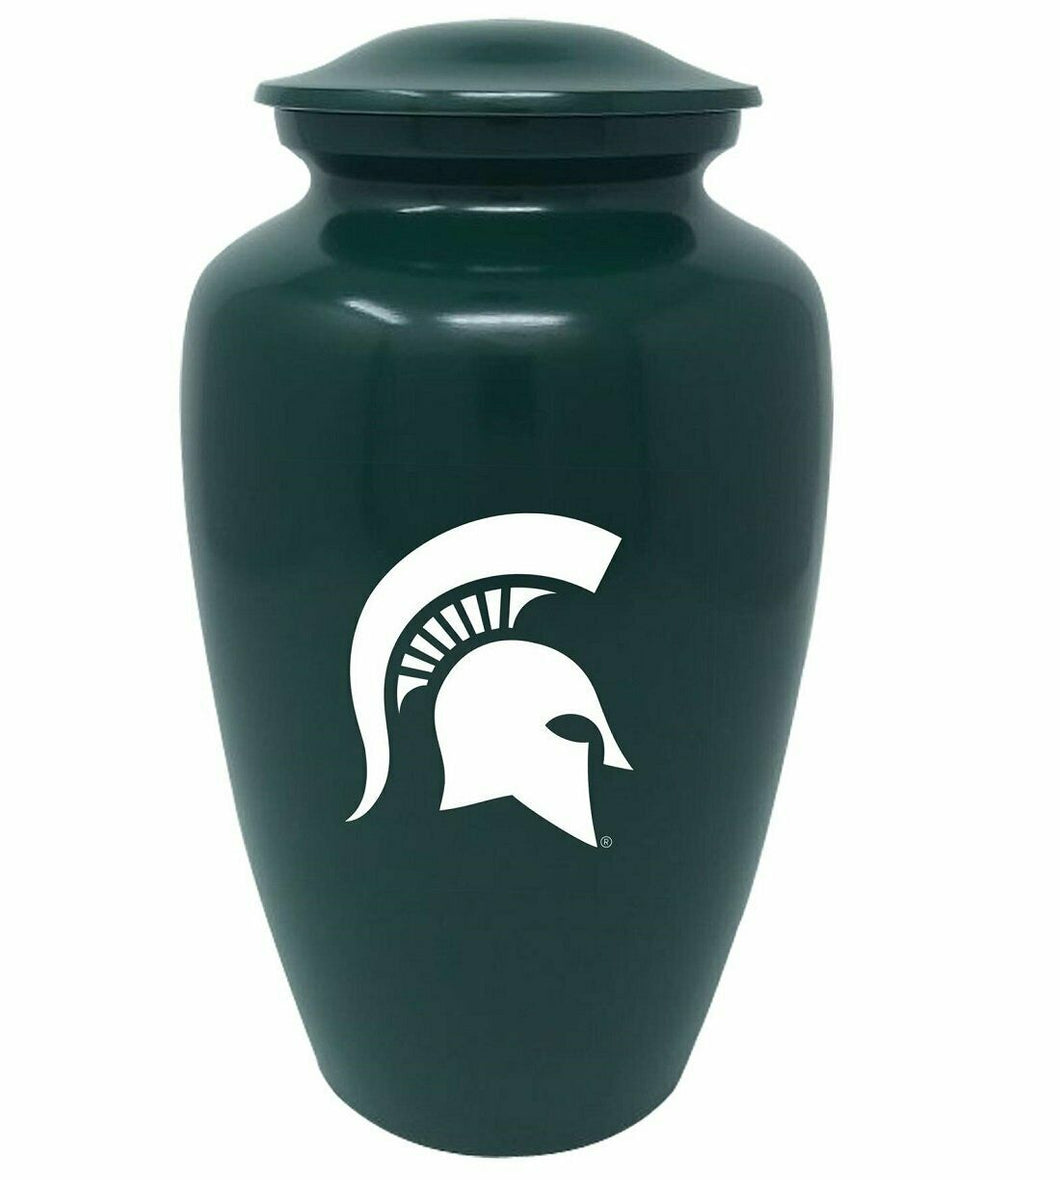 MSU Spartans Team Adult Sports Funeral Cremation Urn For Ashes Green Color